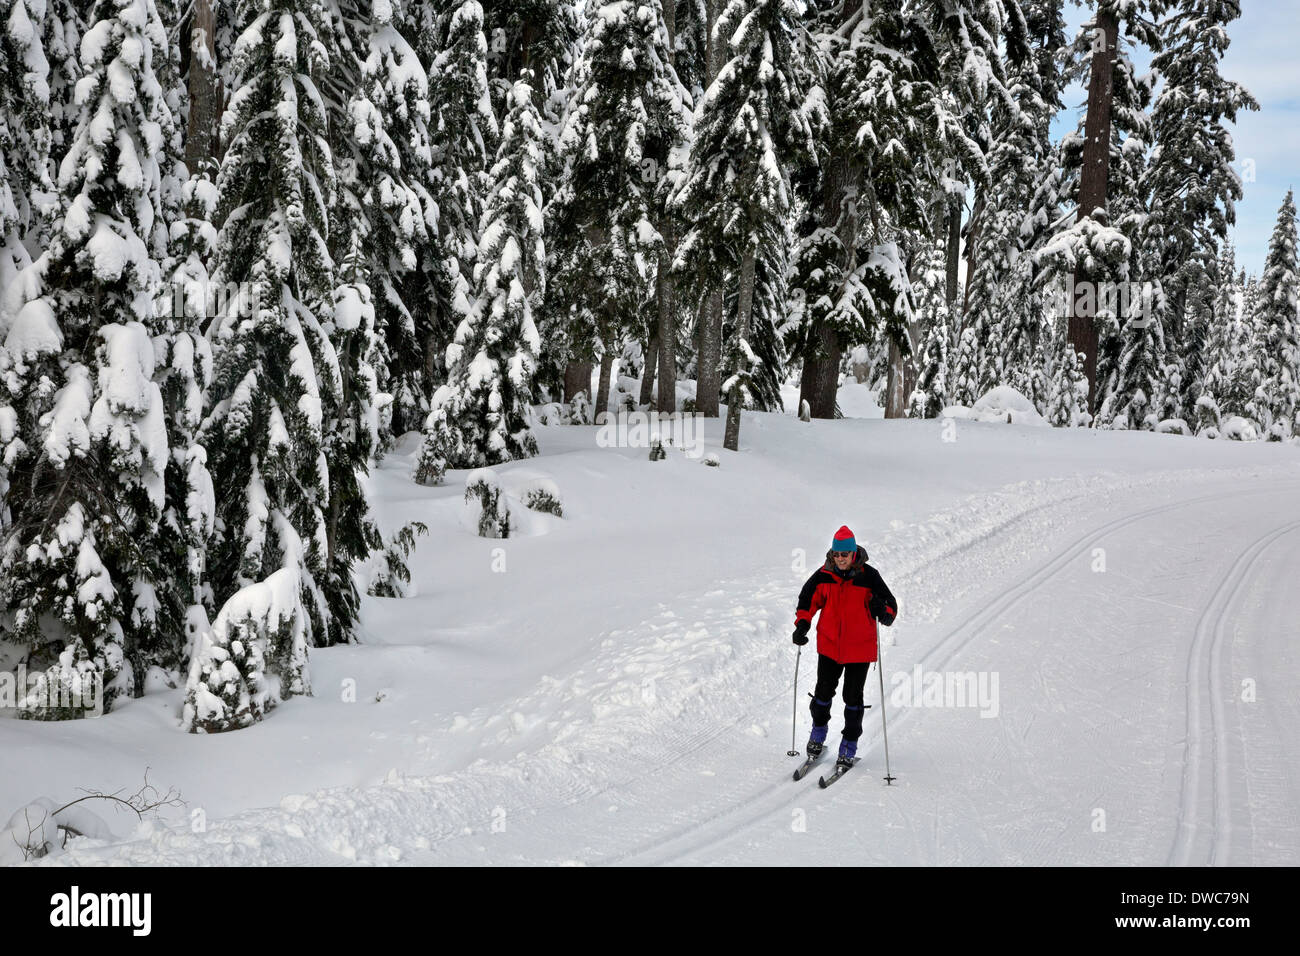 WASHINGTON - Skier on the cross-country ski trails near Windy Pass in the Snoqualmie Pass Nordic Ski Area. Stock Photo